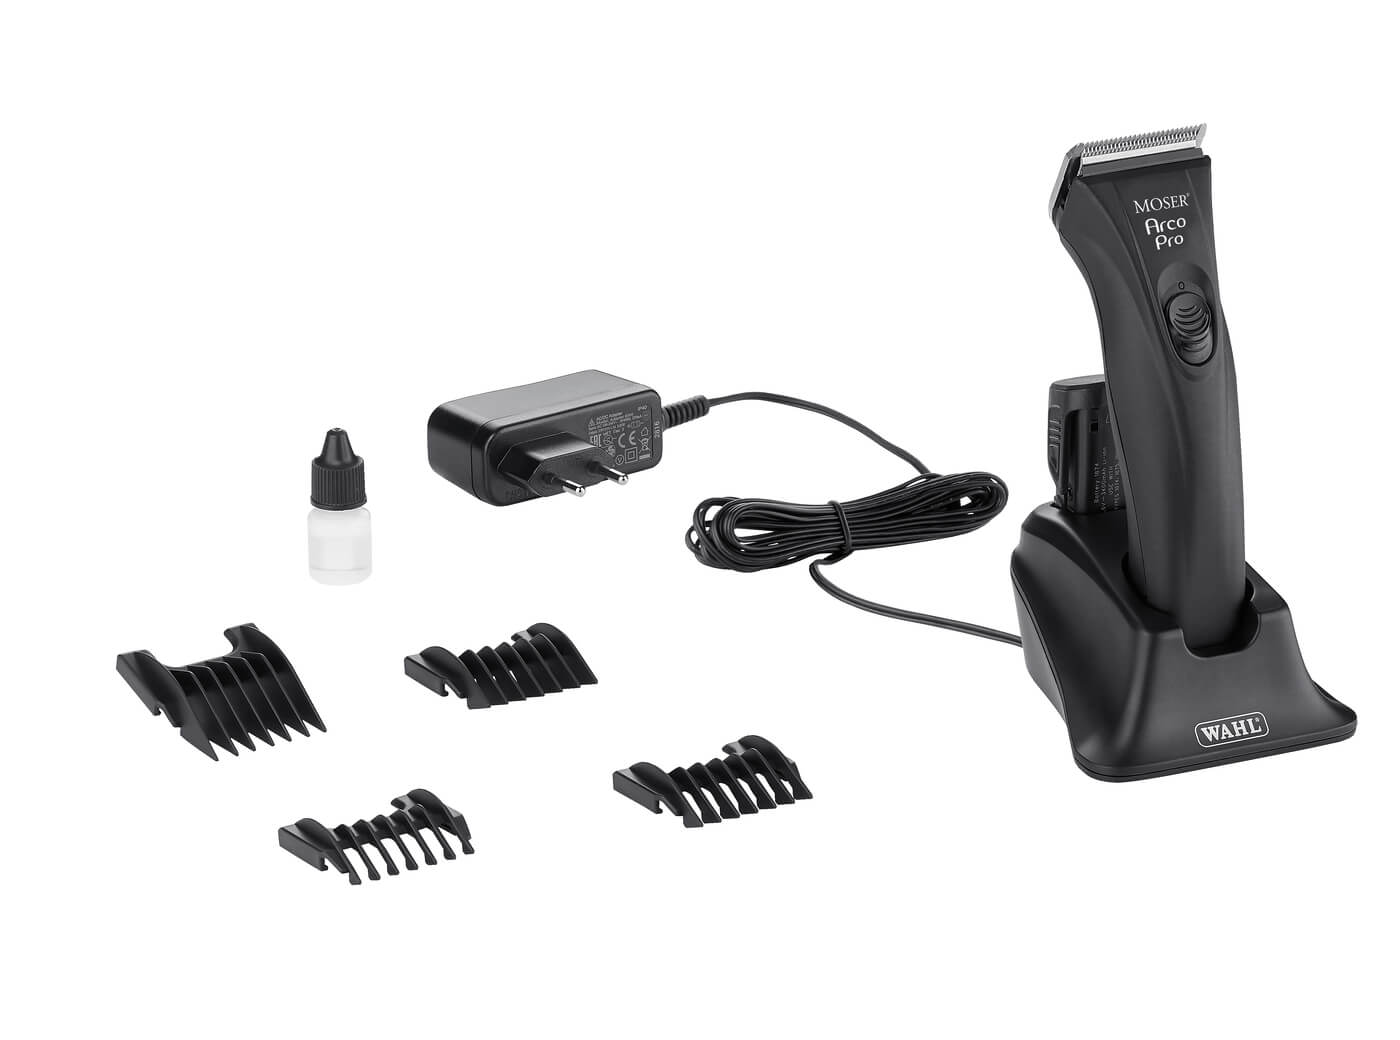 MOSER ARCO PRO, ANIMAL HAIR TRIMMER WITH REPLACEMENT BATTERY FOR THE FULL SHEAR MEDIUM SIZE DOGS AND CATS, AND ALL DETAIL WORK 1876-0060